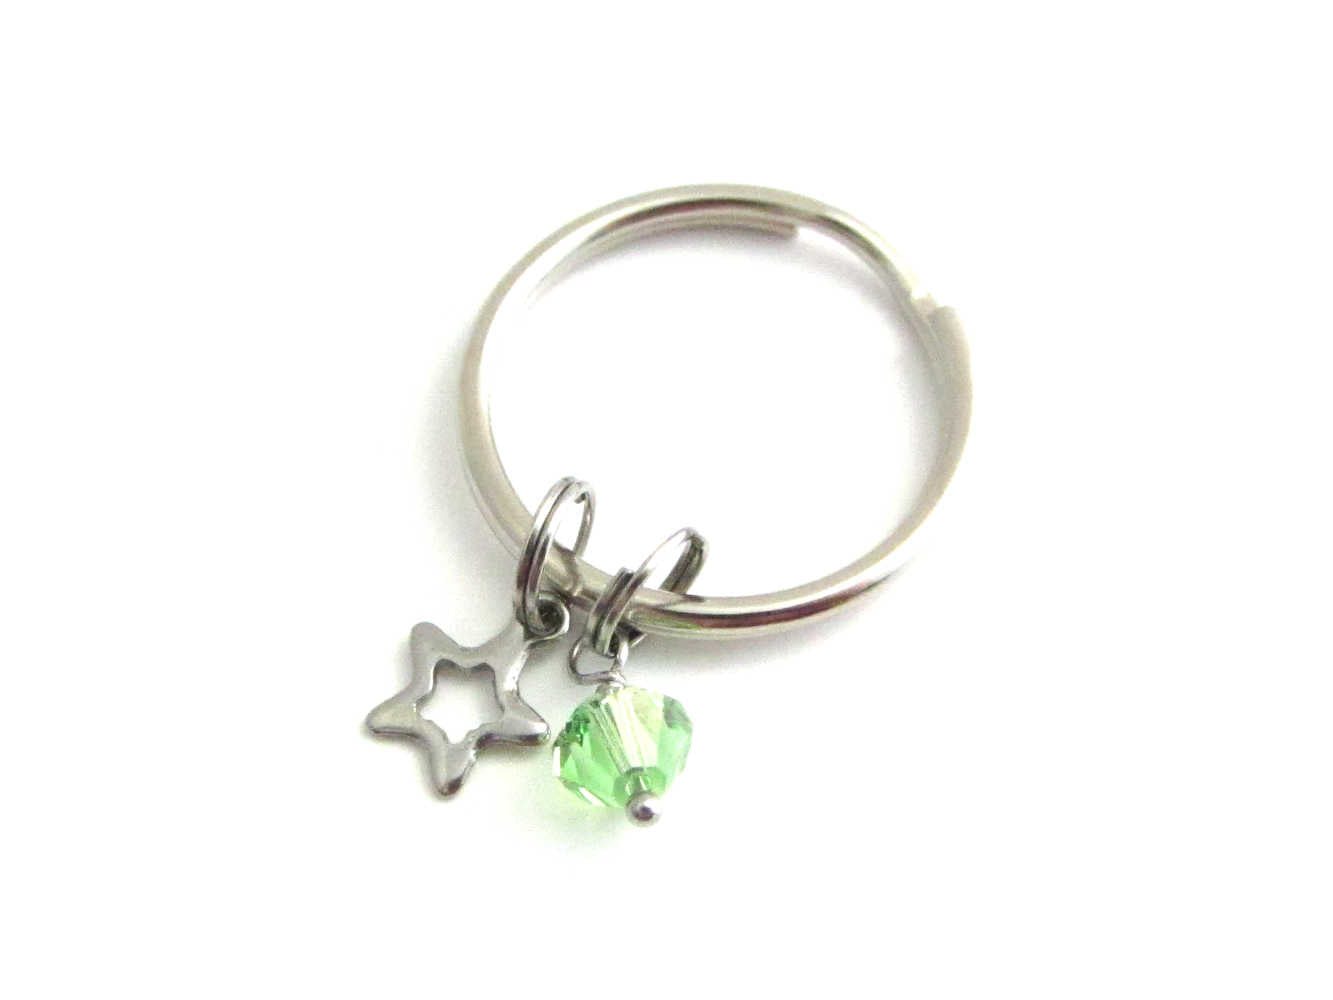 stainless steel hollow star charm and a light green crystal charm on a keyring